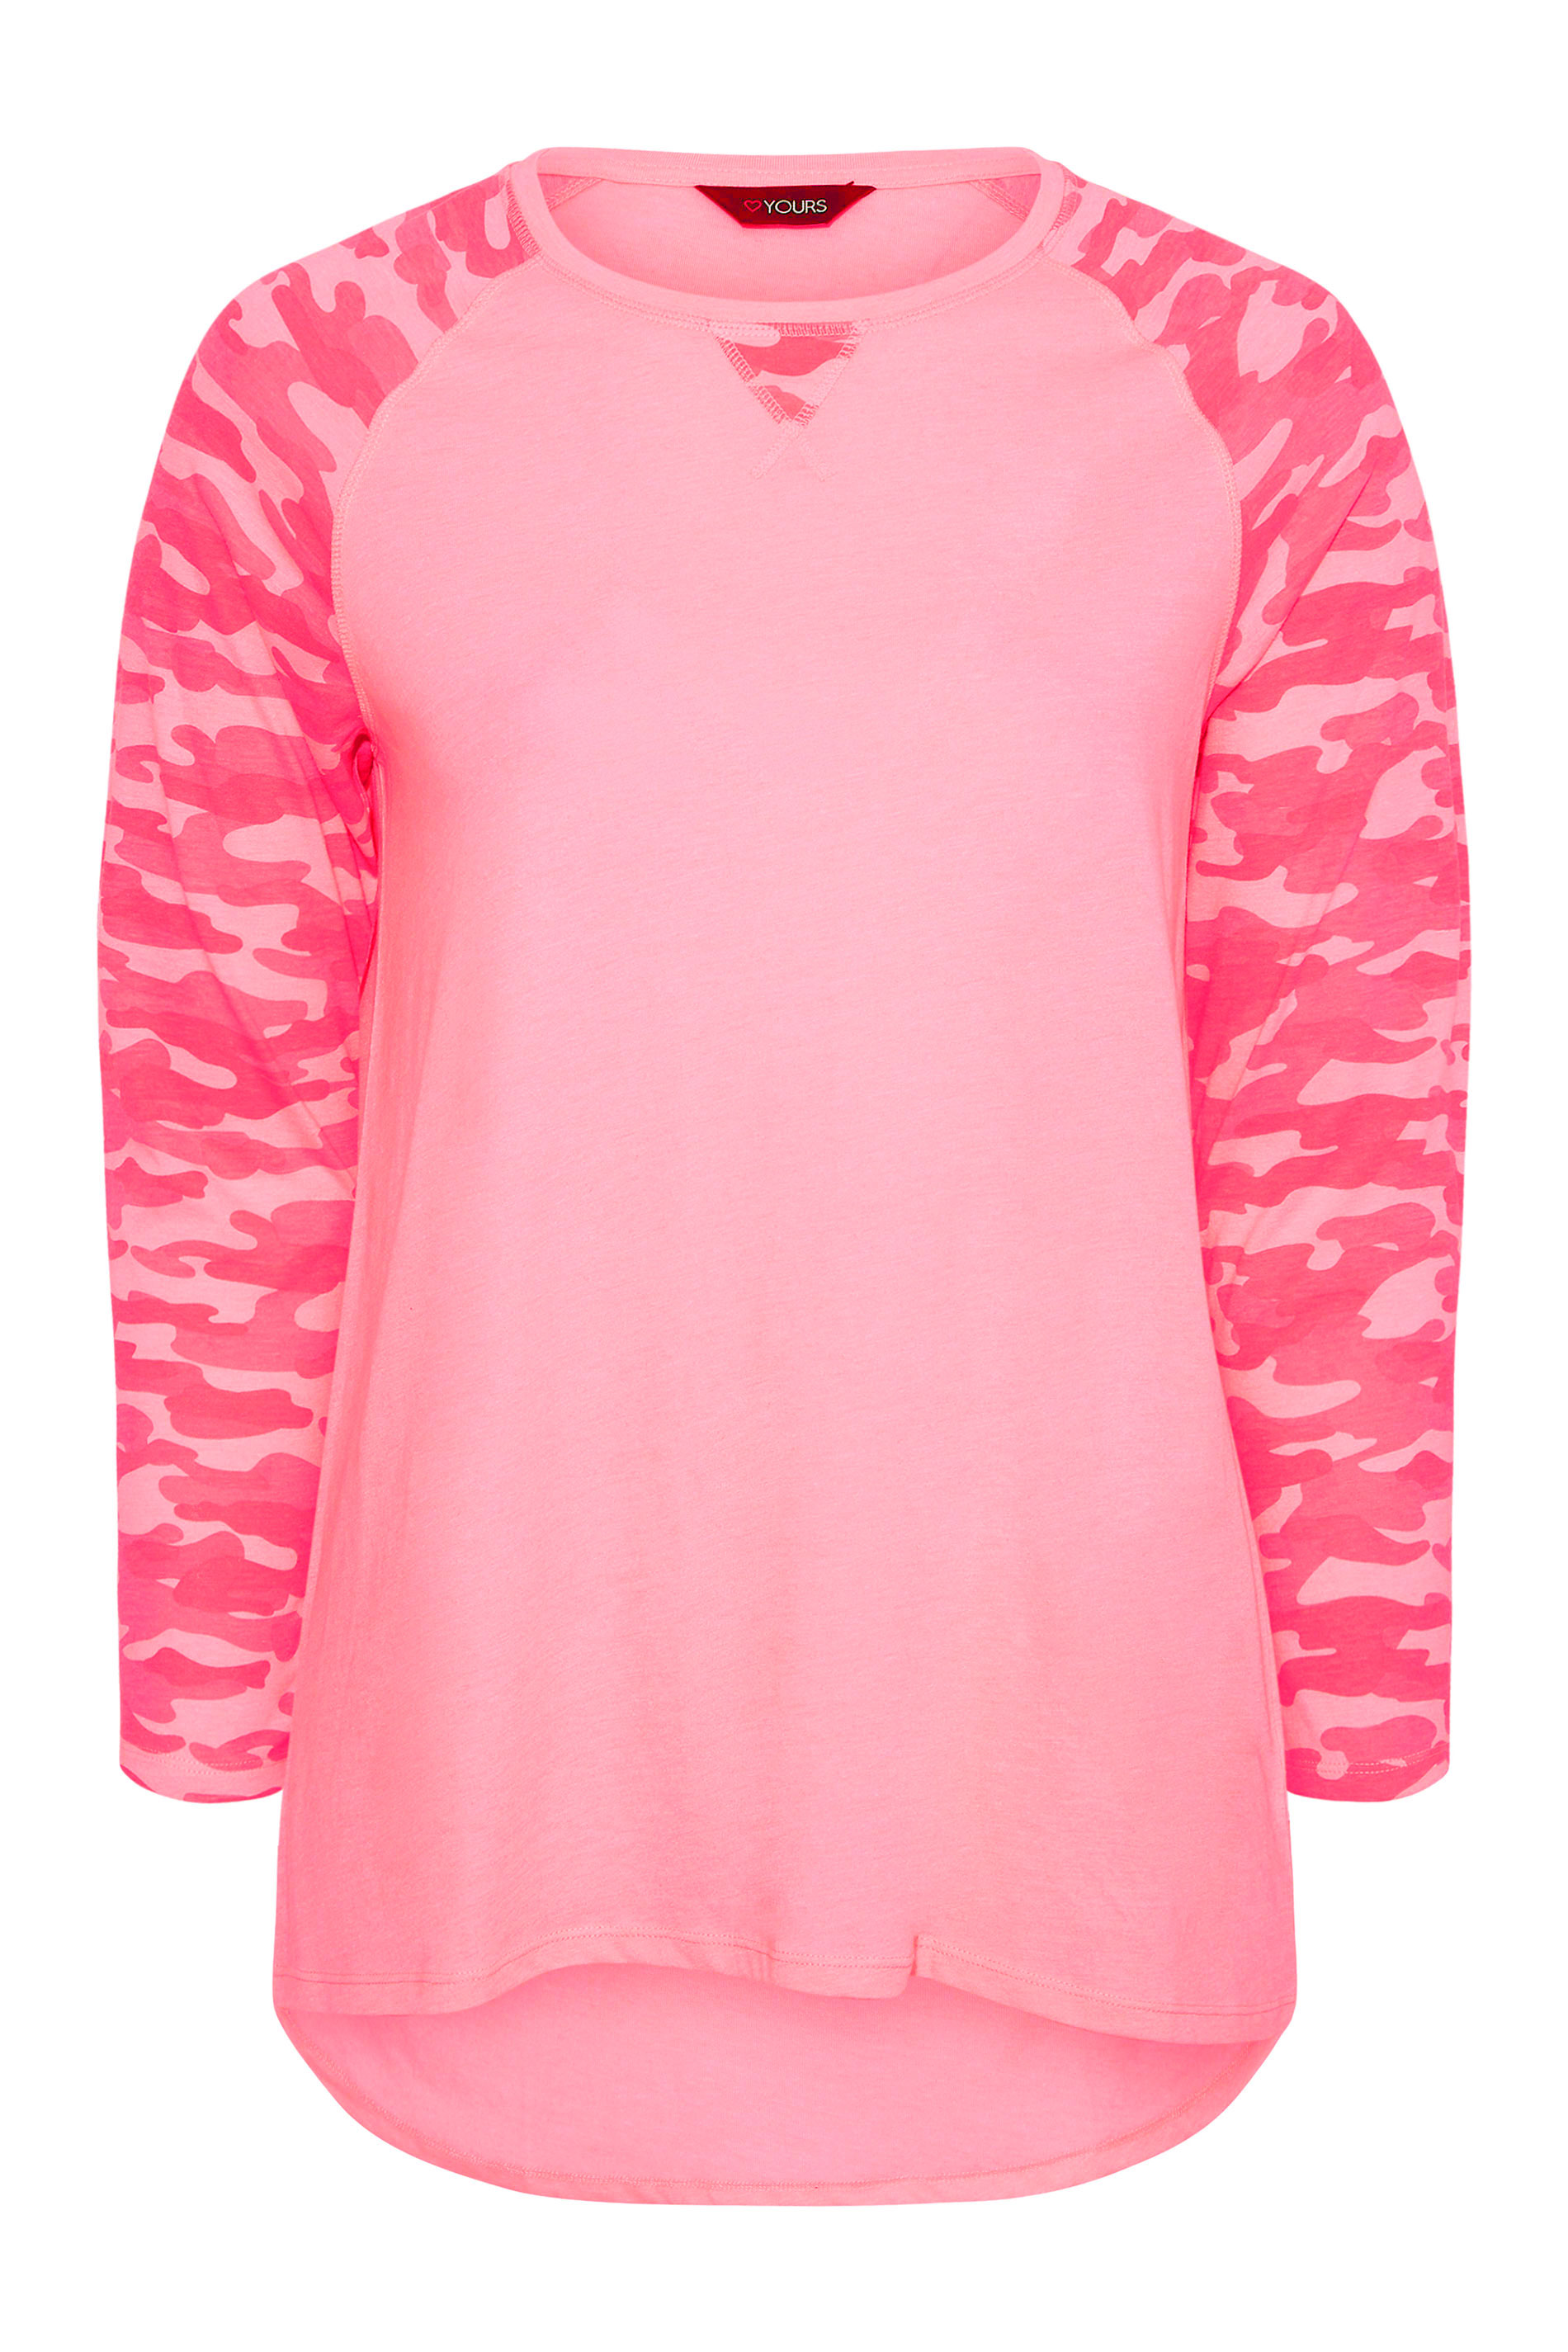 Grande taille  Tops Grande taille  T-Shirts | T-Shirt Rose Manches Longues Design Militaire - BL59185